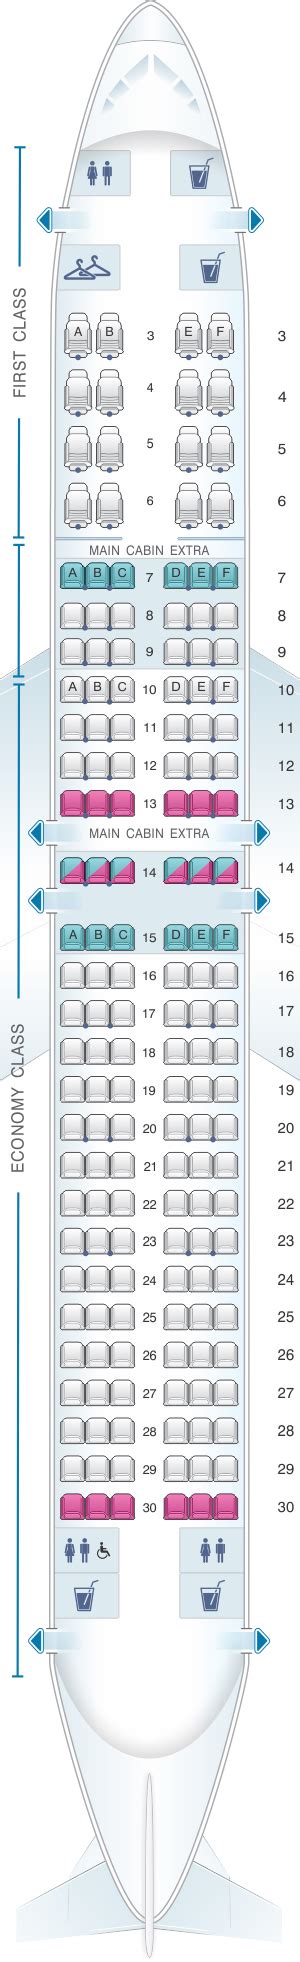 American airlines seat map 737-800. local_pizza. Food & Snacks. Seat 29E is a standard economy middle seat with 31" of seat pitch, which is average across Boeing 737-800's worldwide. 